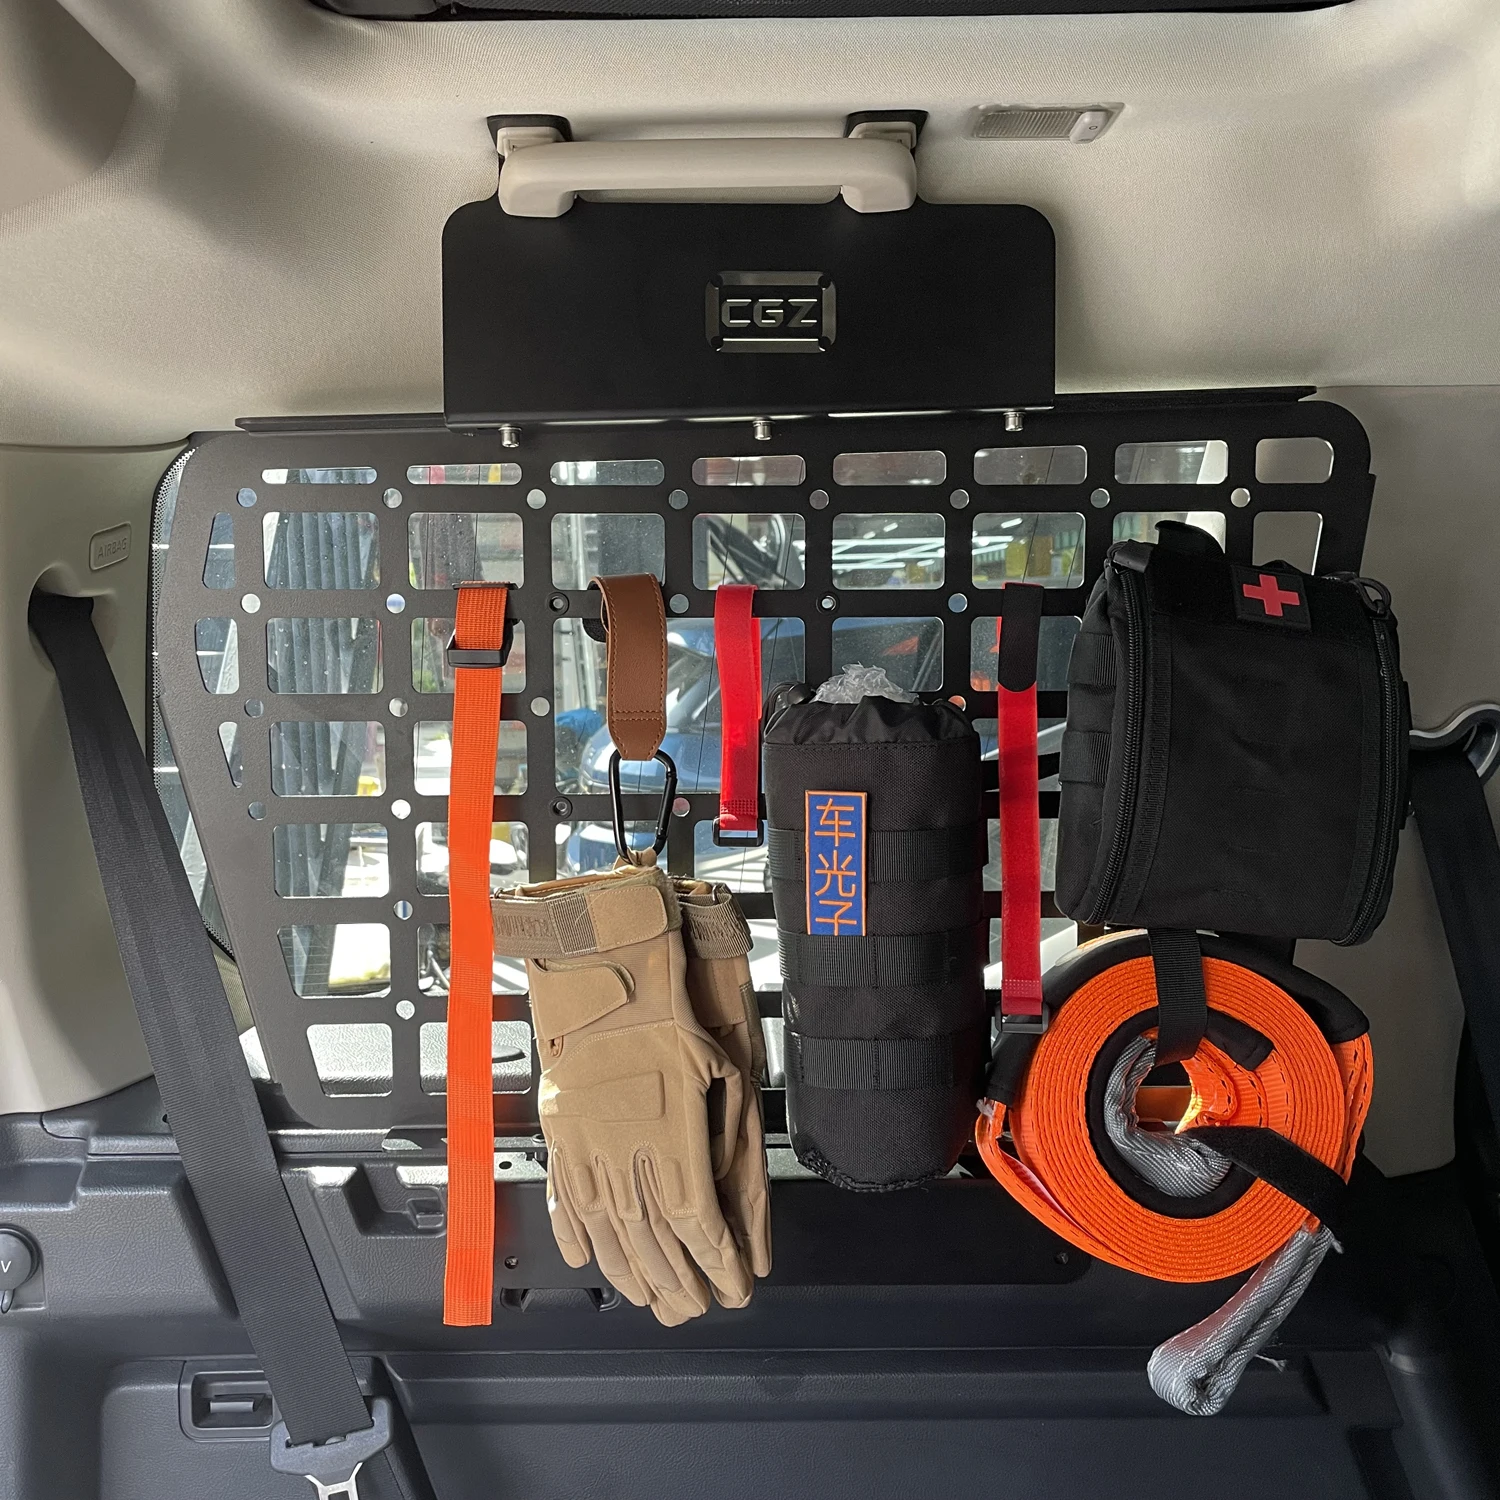 

for Land Rover Discovery 3 LR3 / Discovery 4 LR4 2004-2016 Rear Trunk Side Window Shelf Debris Rack Organizer Molle Panel 1 Set